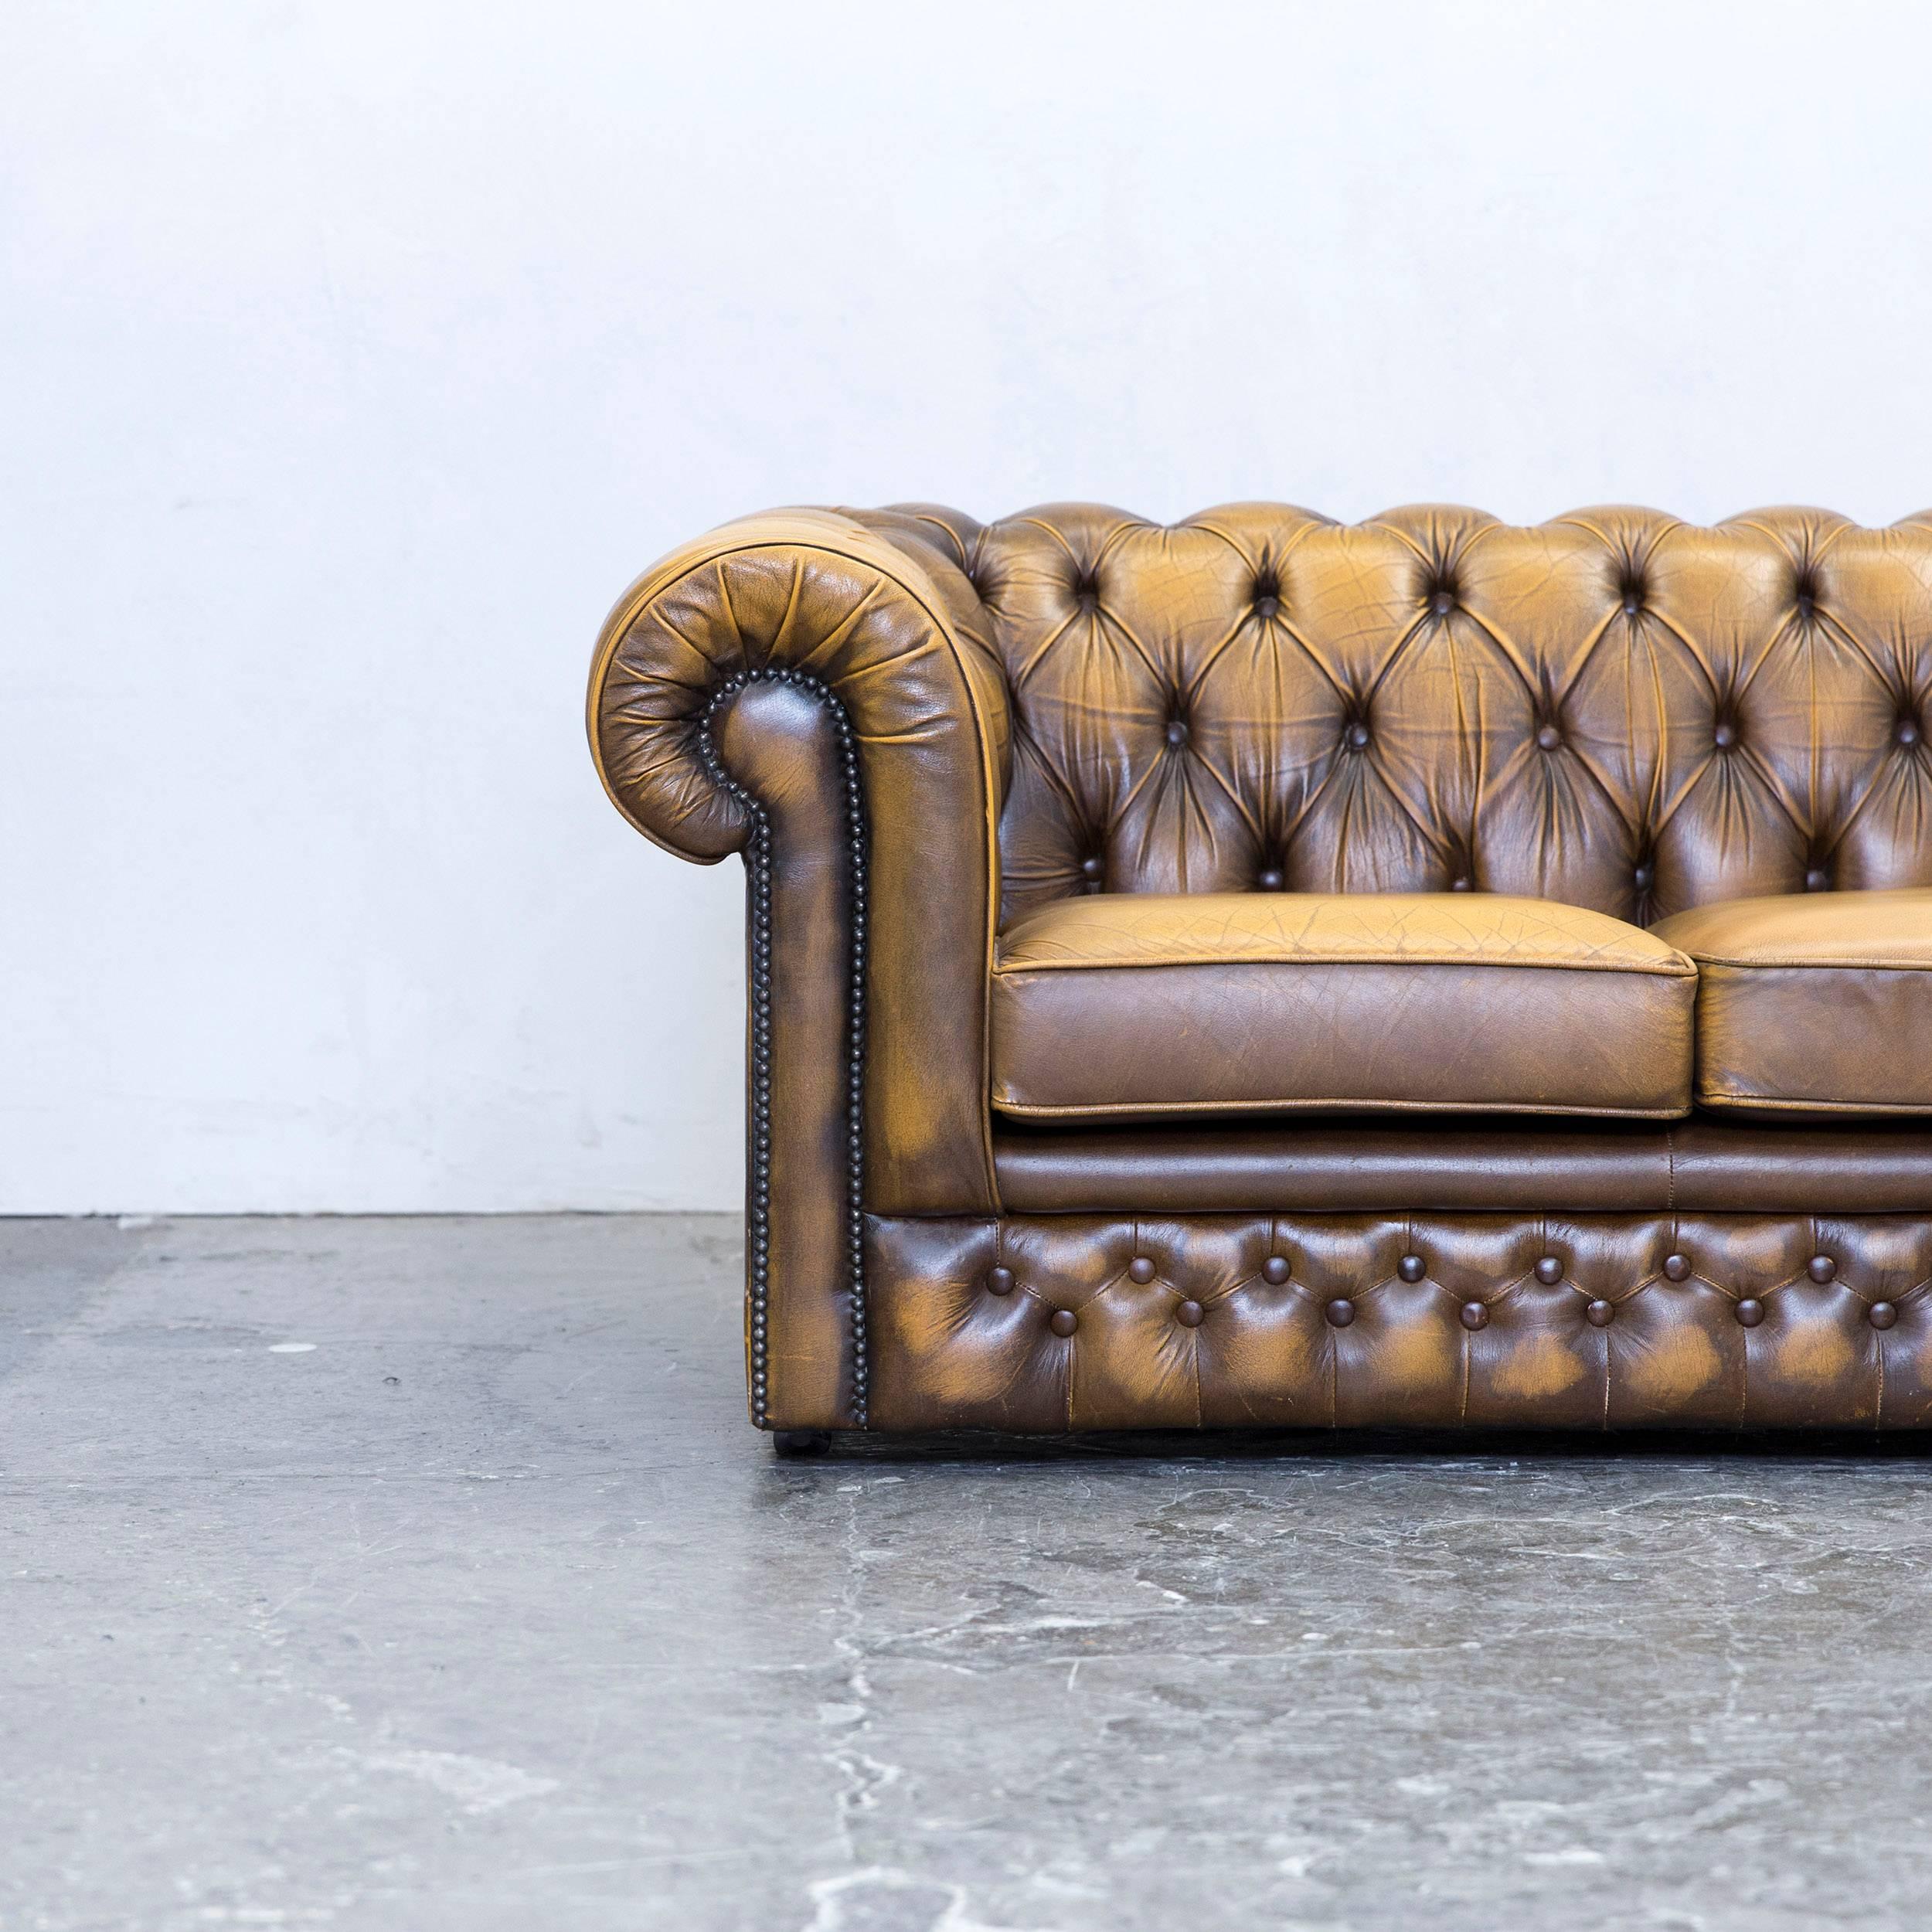 Brown colored original Thomas Lloyd Chesterfield leather sofa in a vintage design, made for pure comfort and elegance.